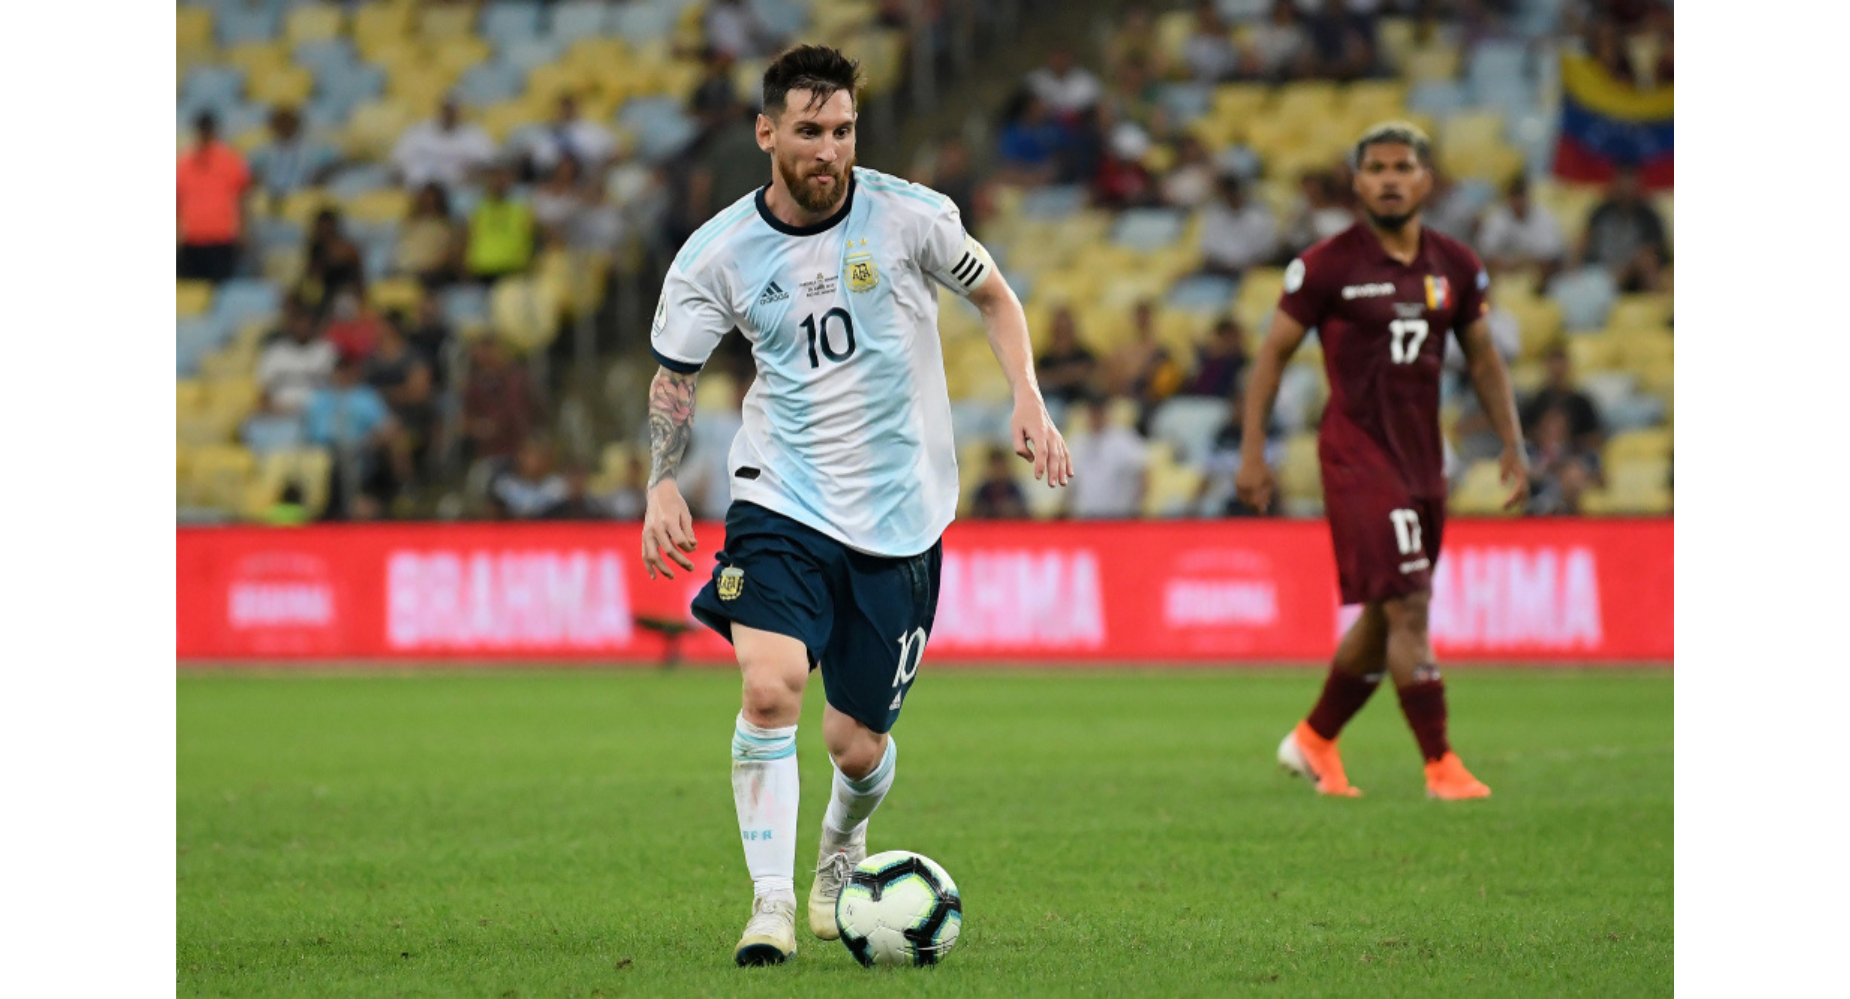 Beer Banned At 2022 World Cup, But Sponsor Budweiser Could Get A Boost From Argentina Winning And Lionel Messi Support